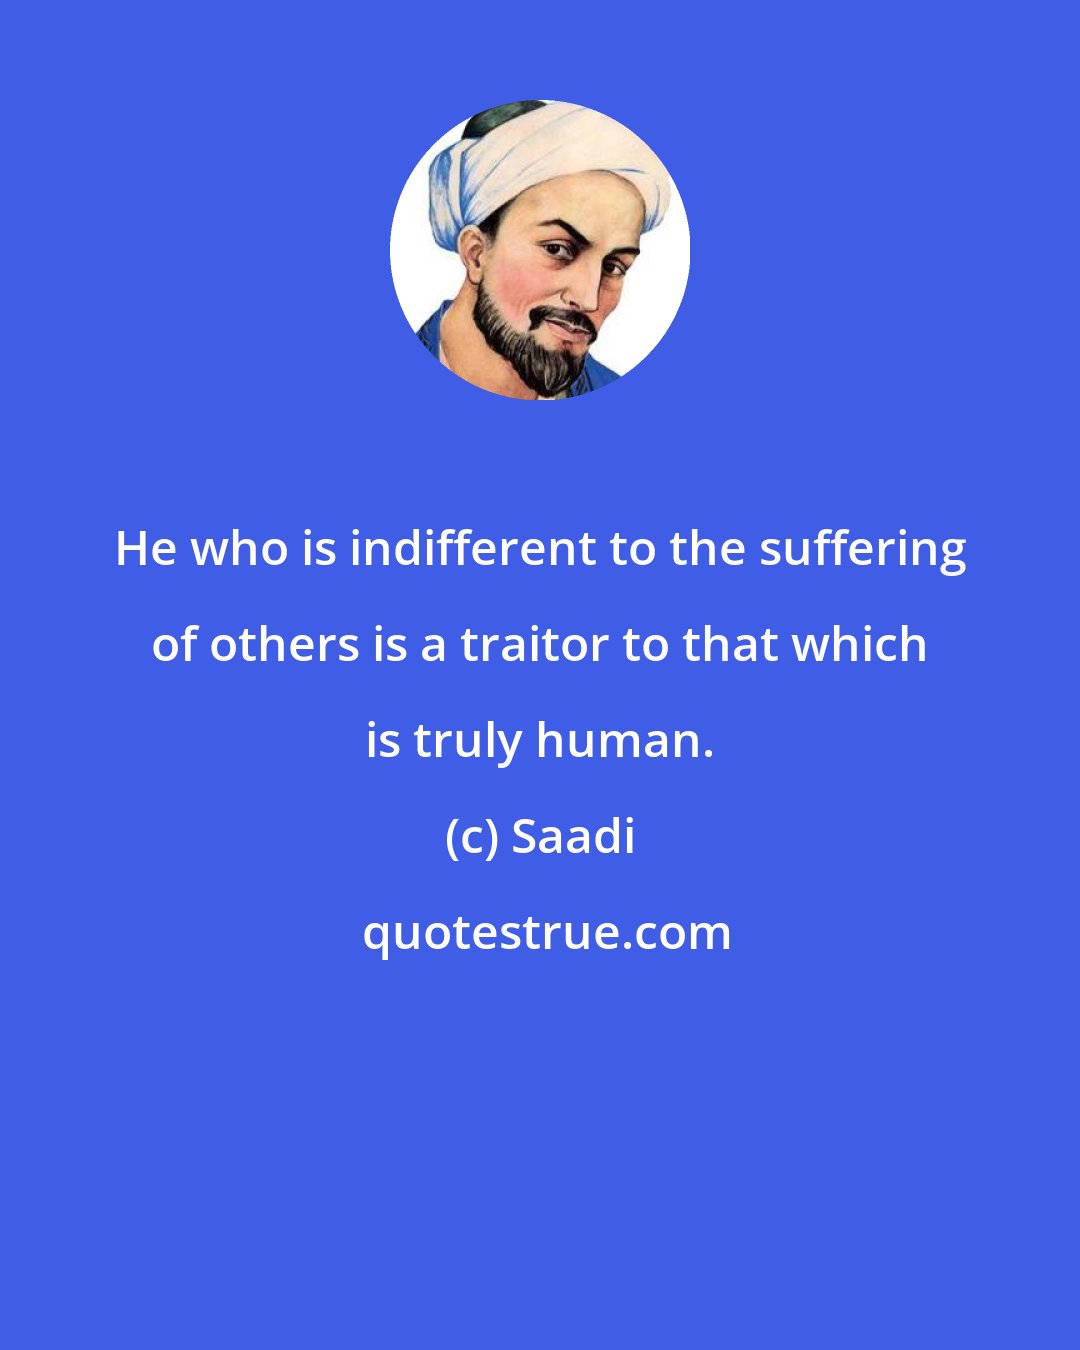 Saadi: He who is indifferent to the suffering of others is a traitor to that which is truly human.